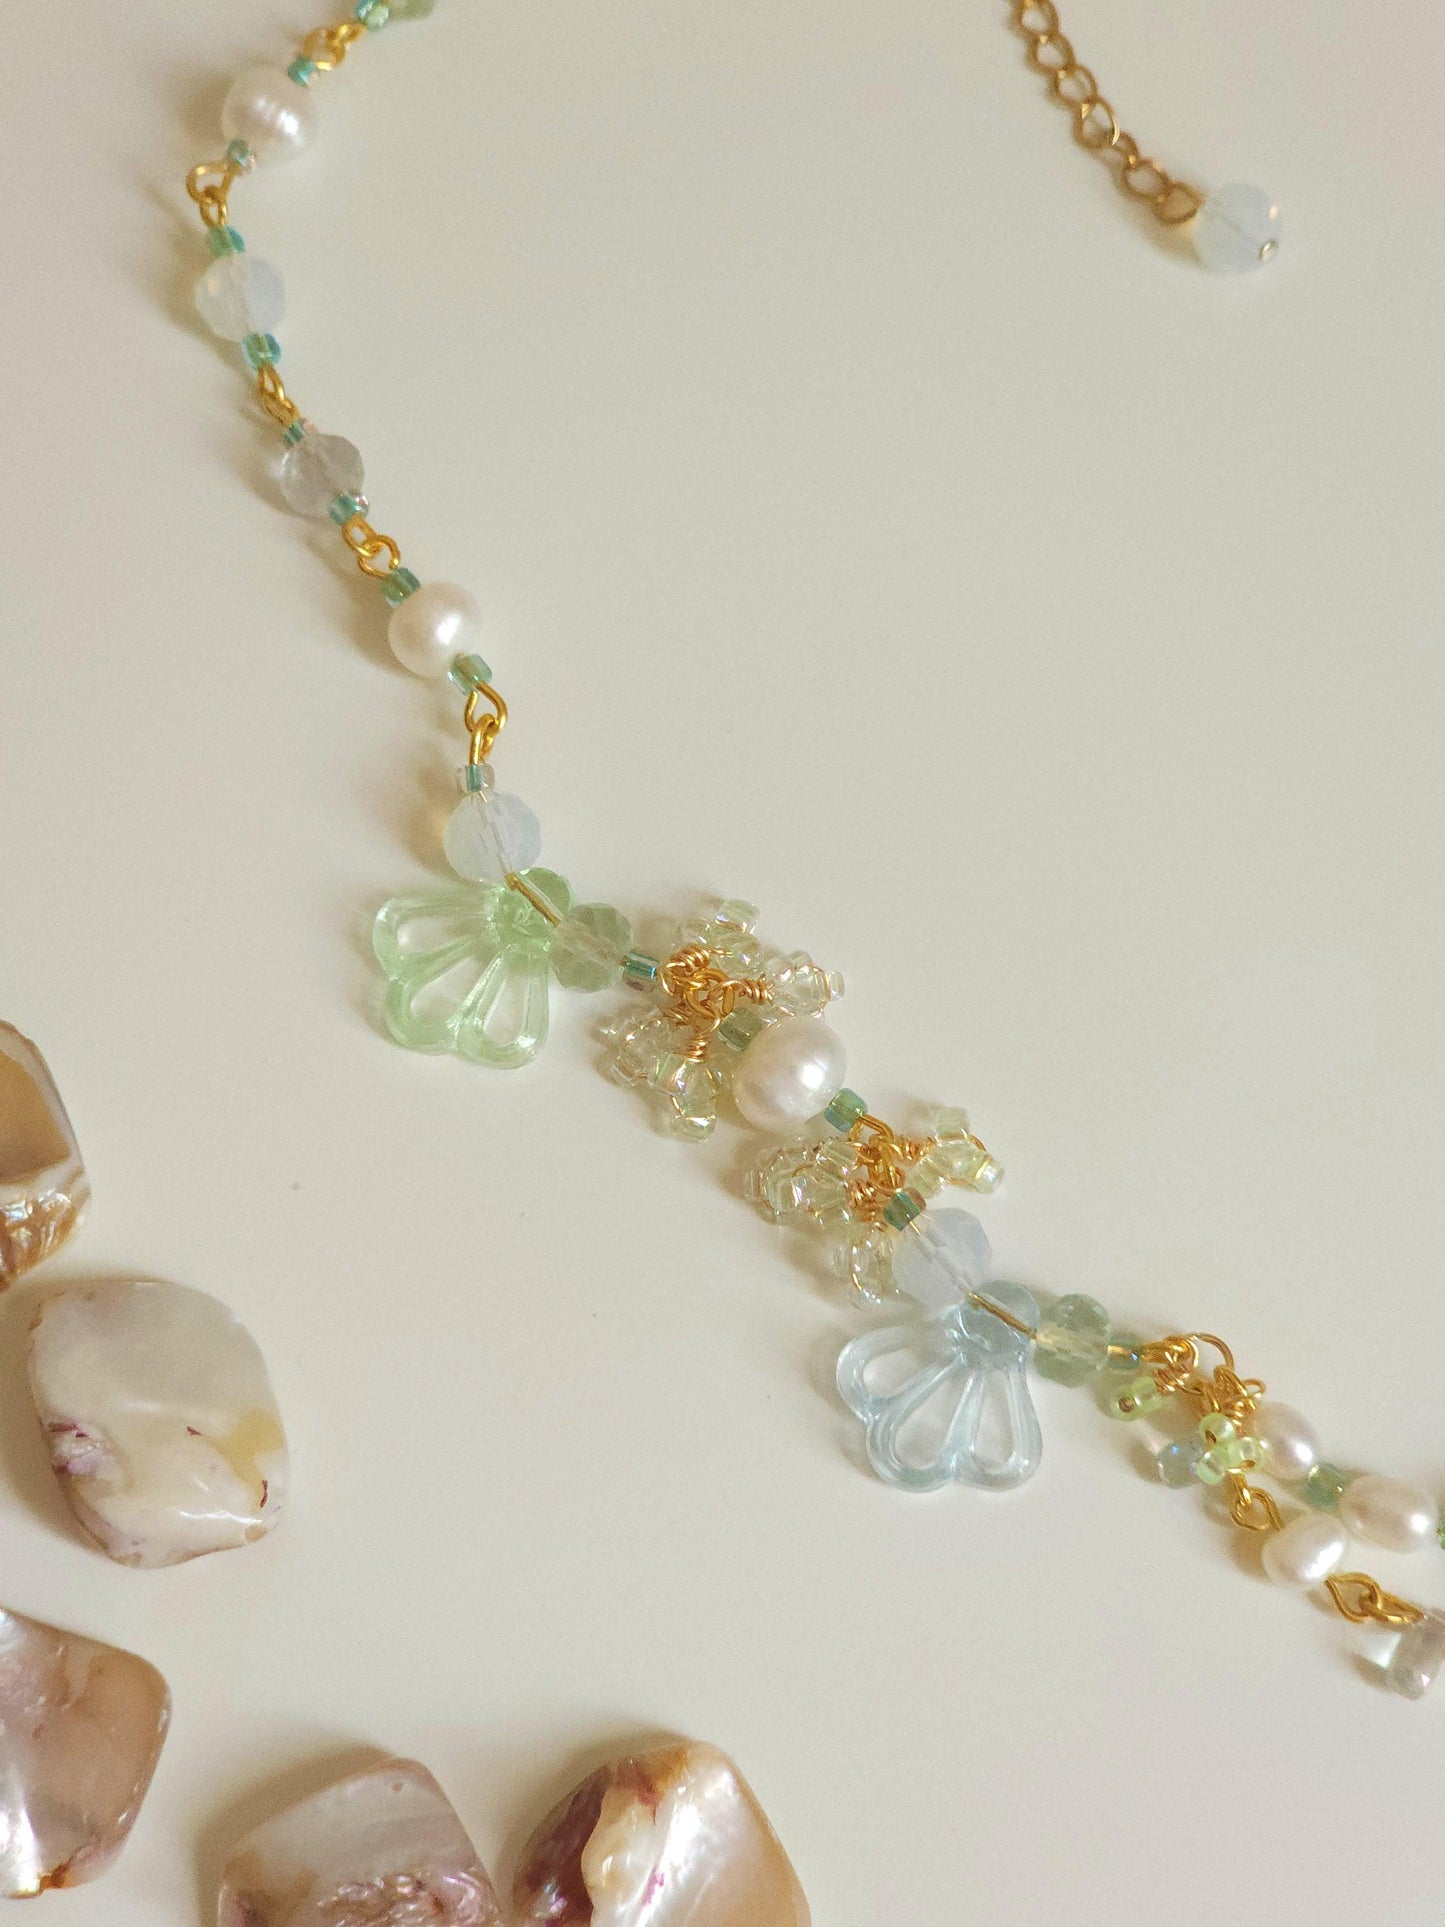 Seashell Serenity Necklace - By Cocoyu